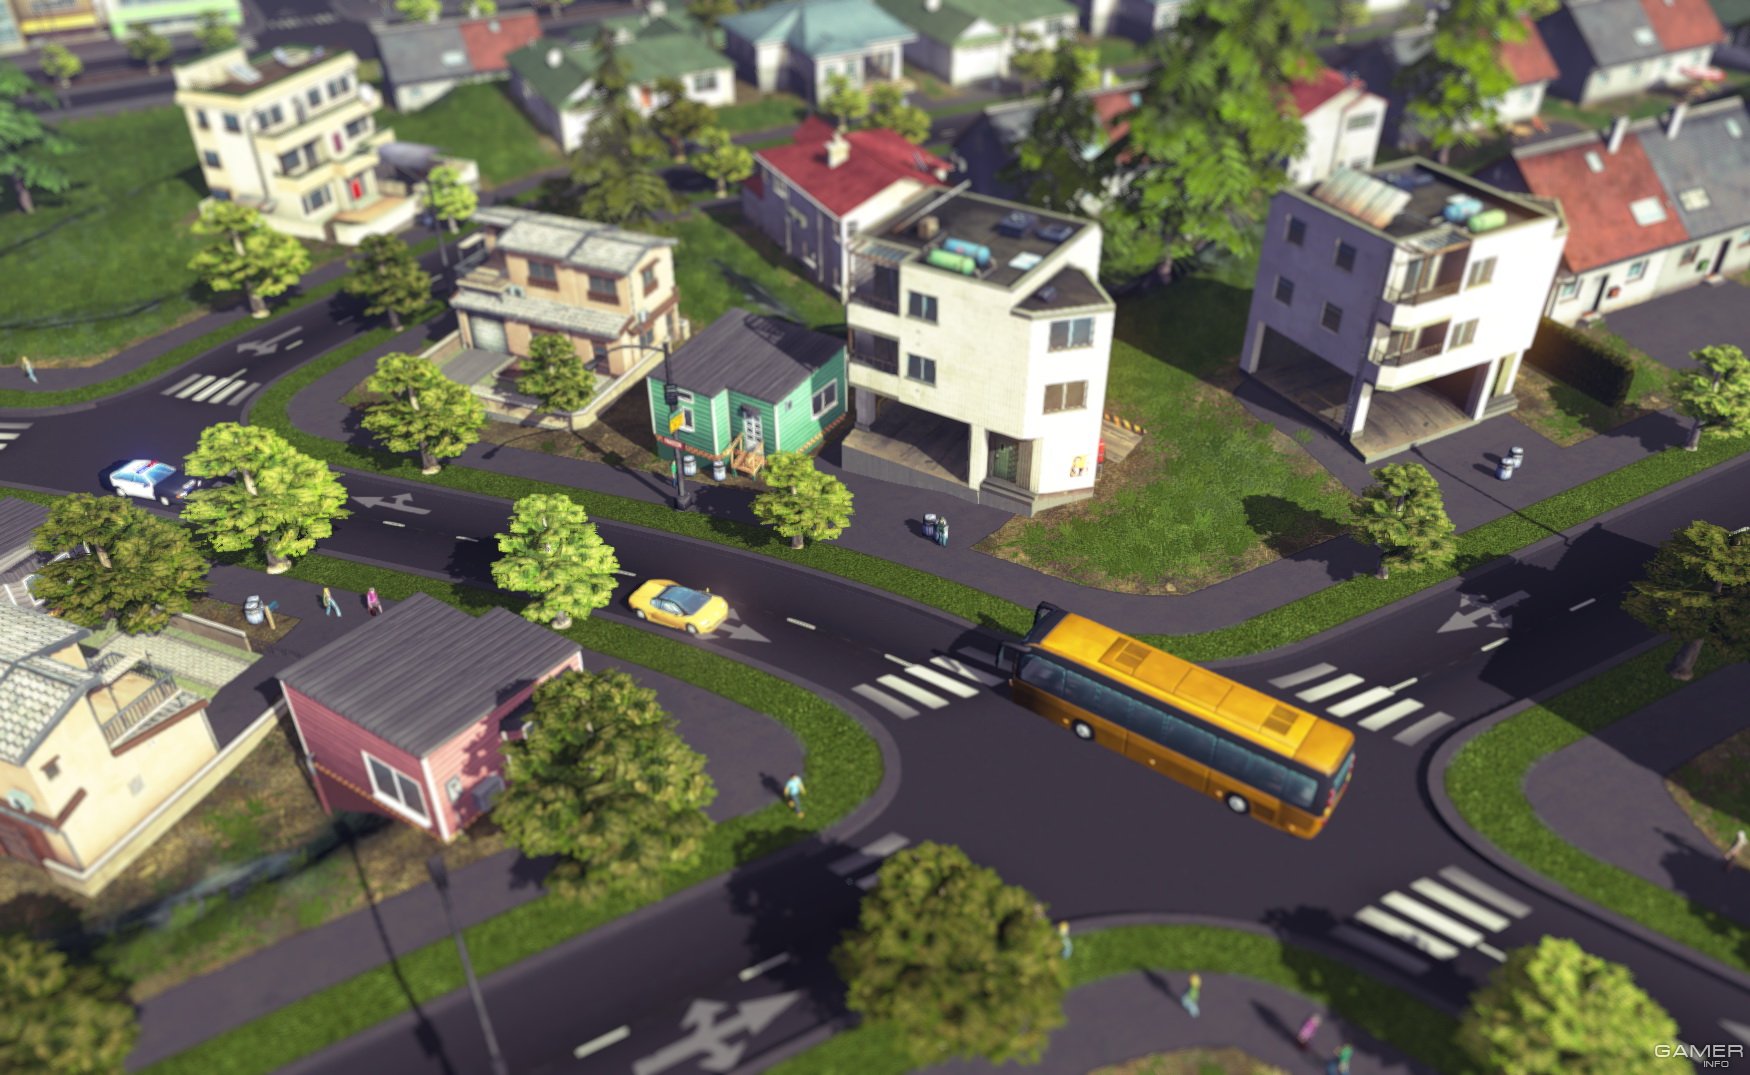 Cities: Skylines (2015 video game)